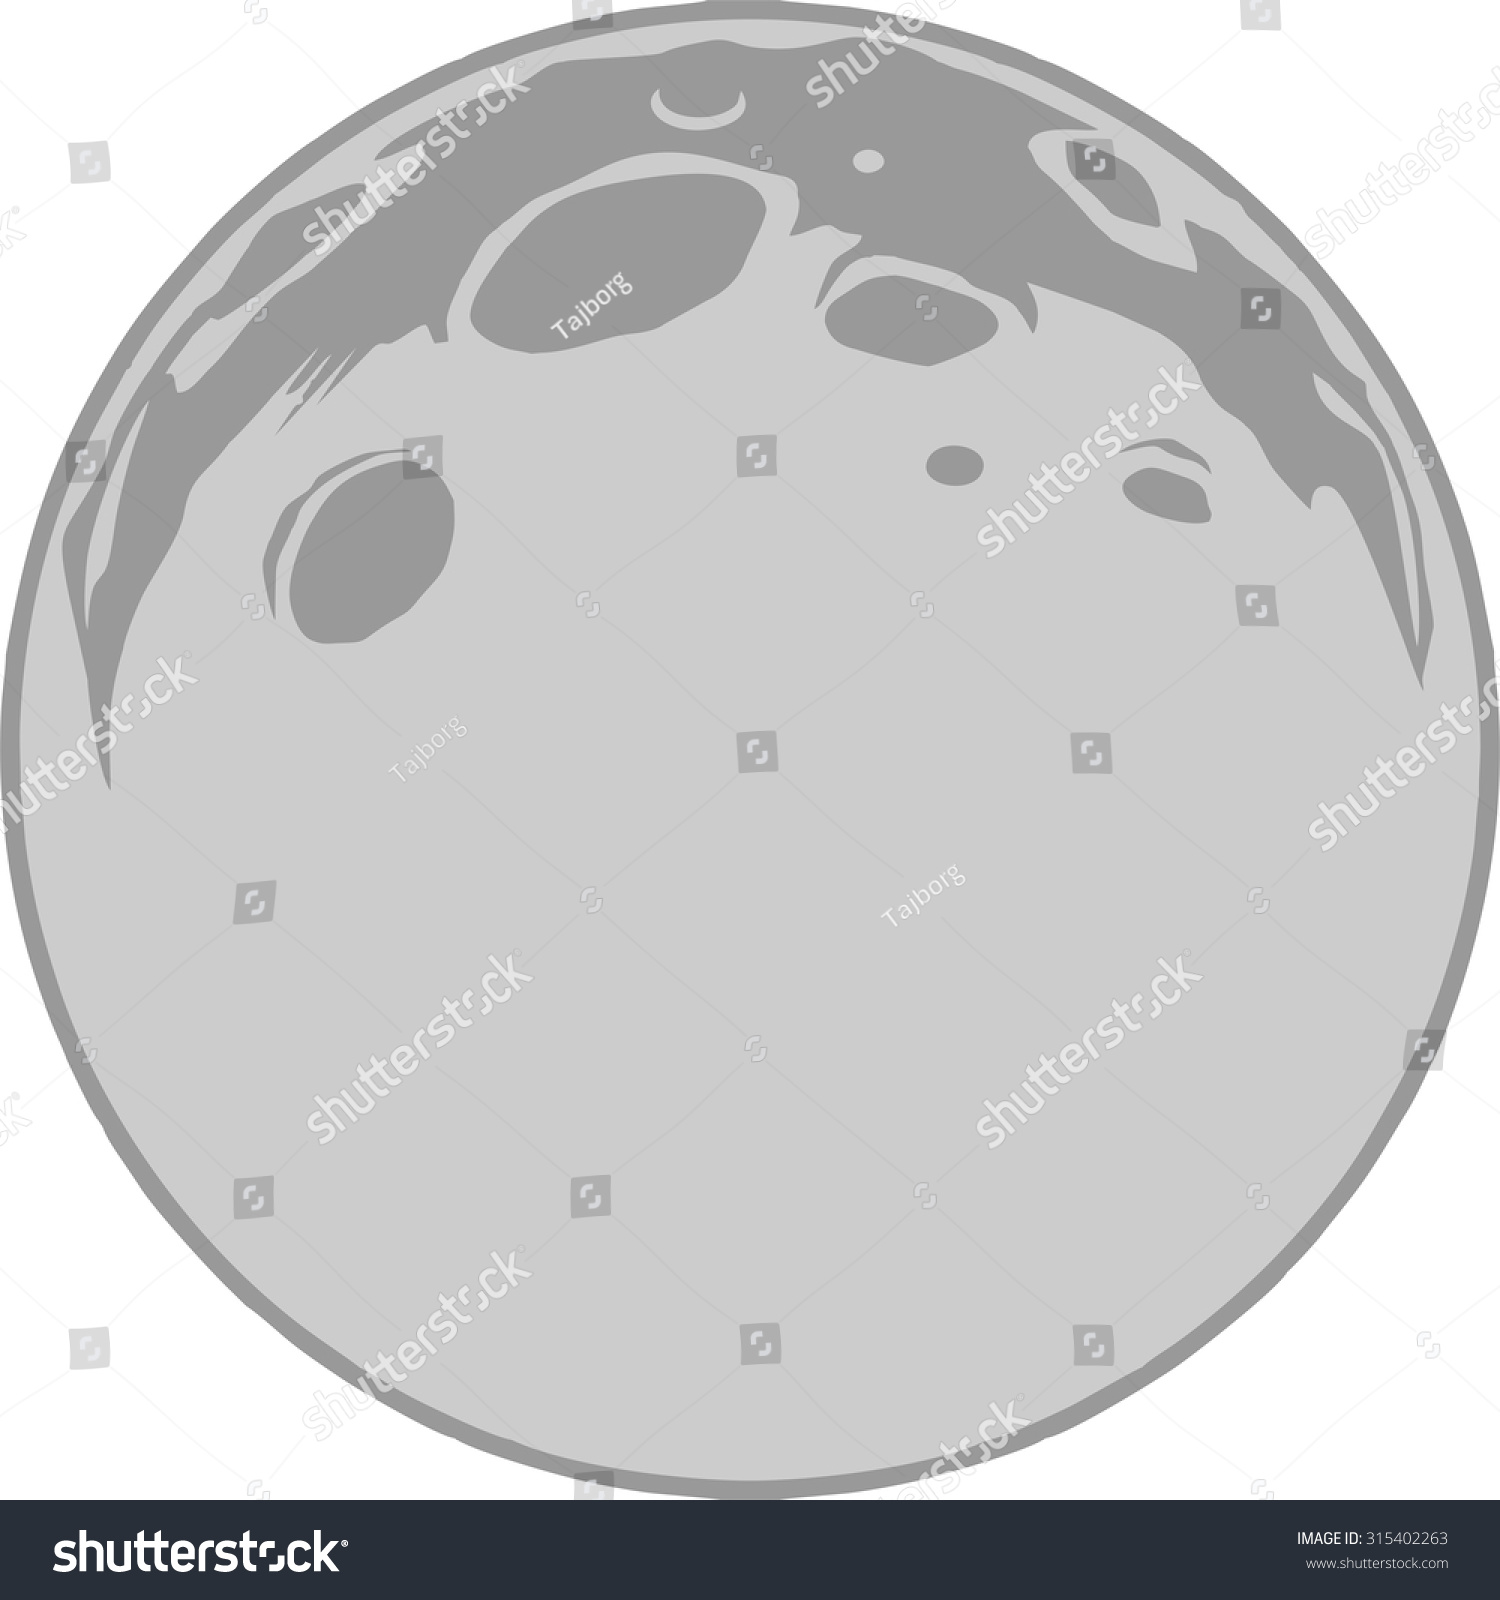 moon crater clipart - photo #26